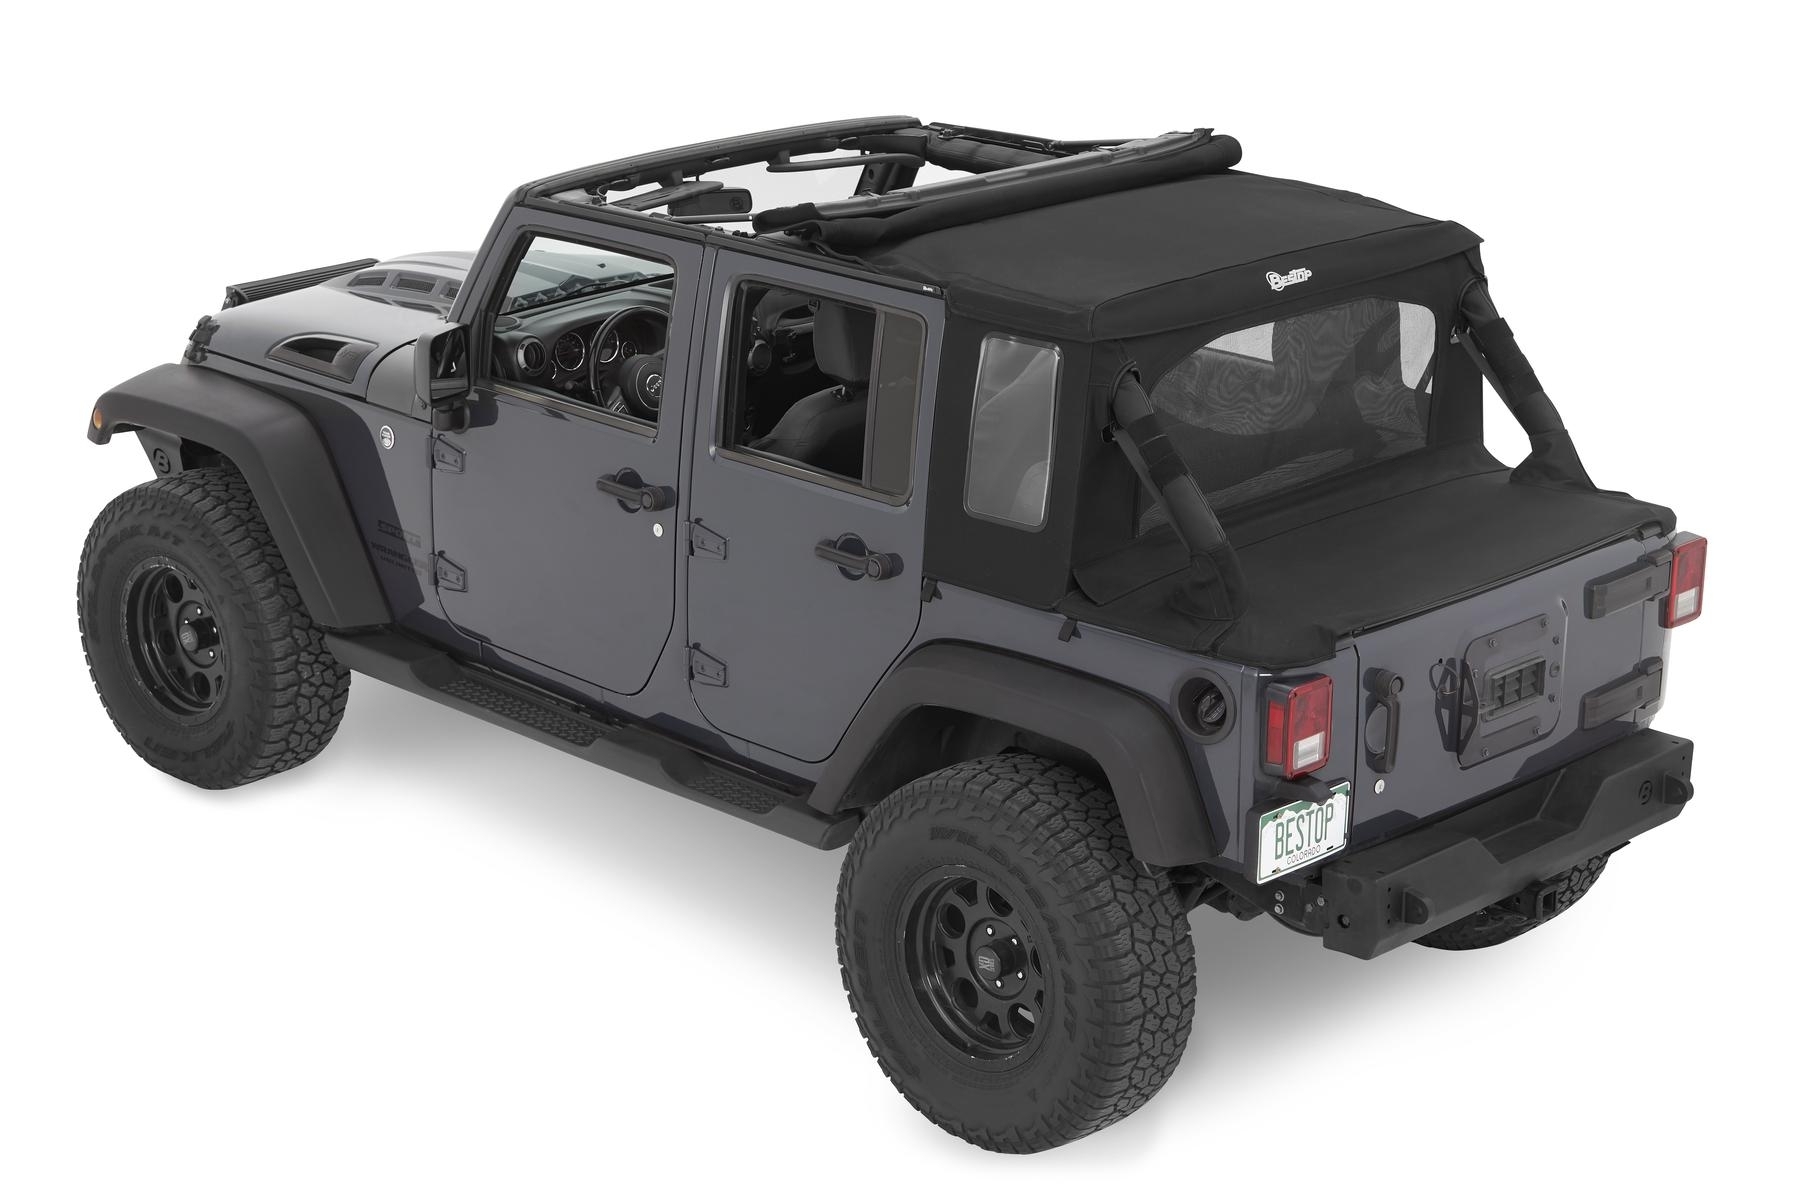 Bestop Halftop Soft Top for 2007-2018 Jeep Wrangler JK Unlimited - Black  Twill | Best Prices & Reviews at Morris 4x4